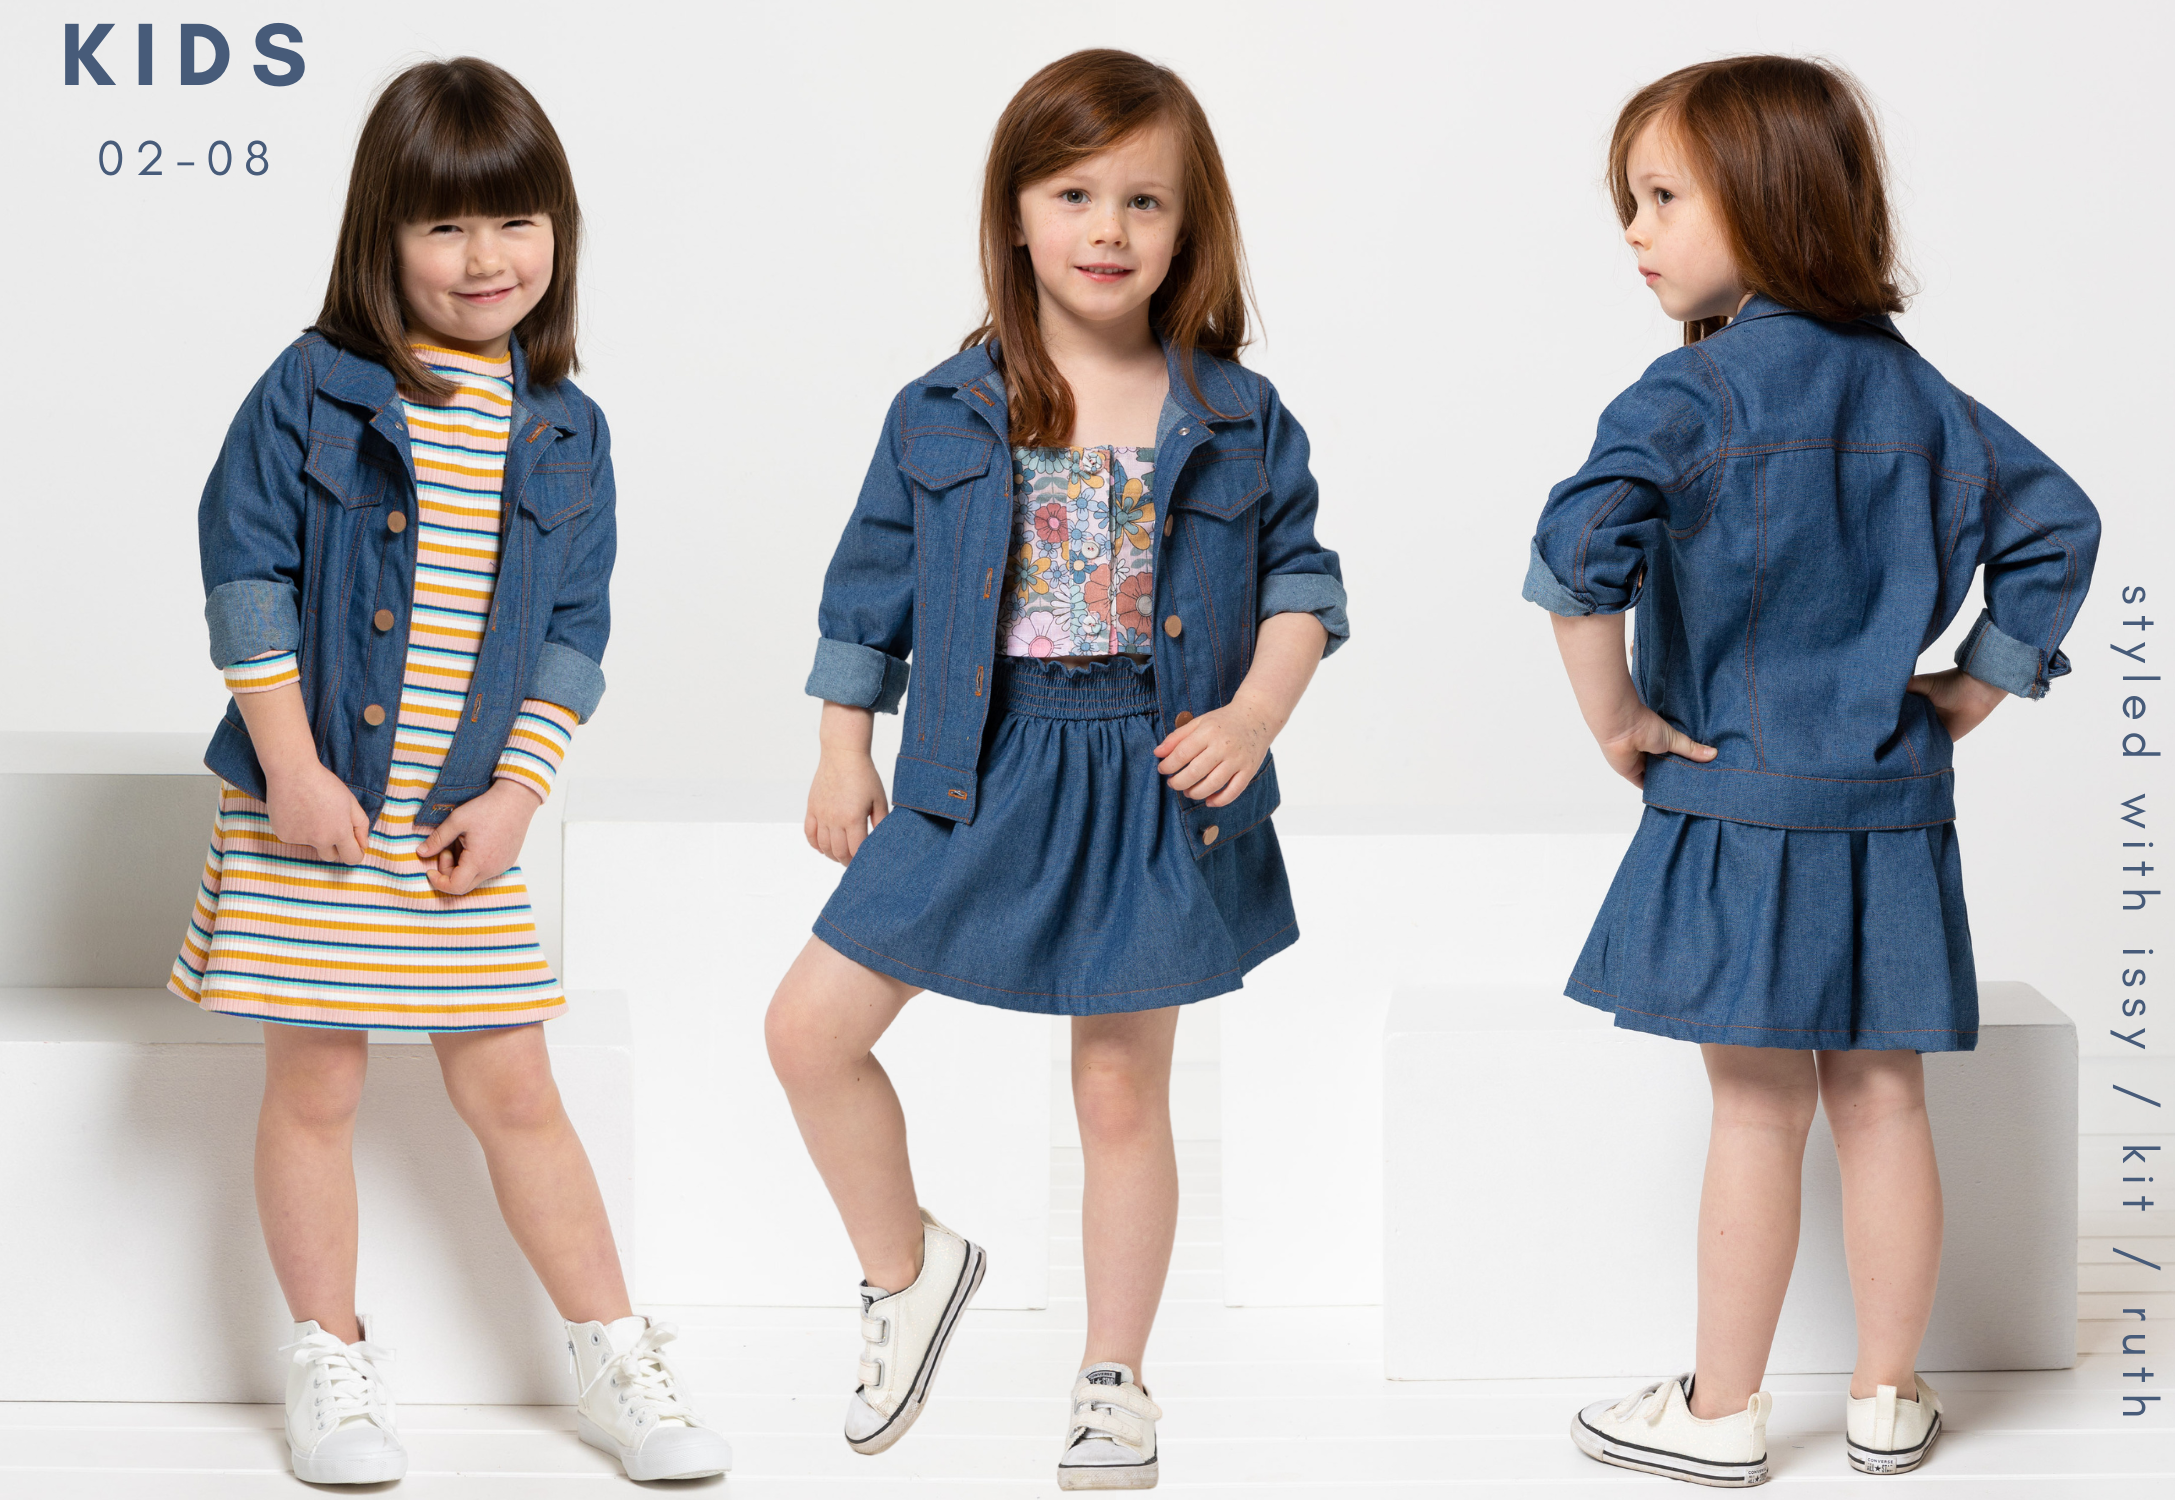 Style Arc's latest pattern release: Charlie Kids Jacket - available to purchase in Kids sizing 02-08 or Teens sizing -8-16